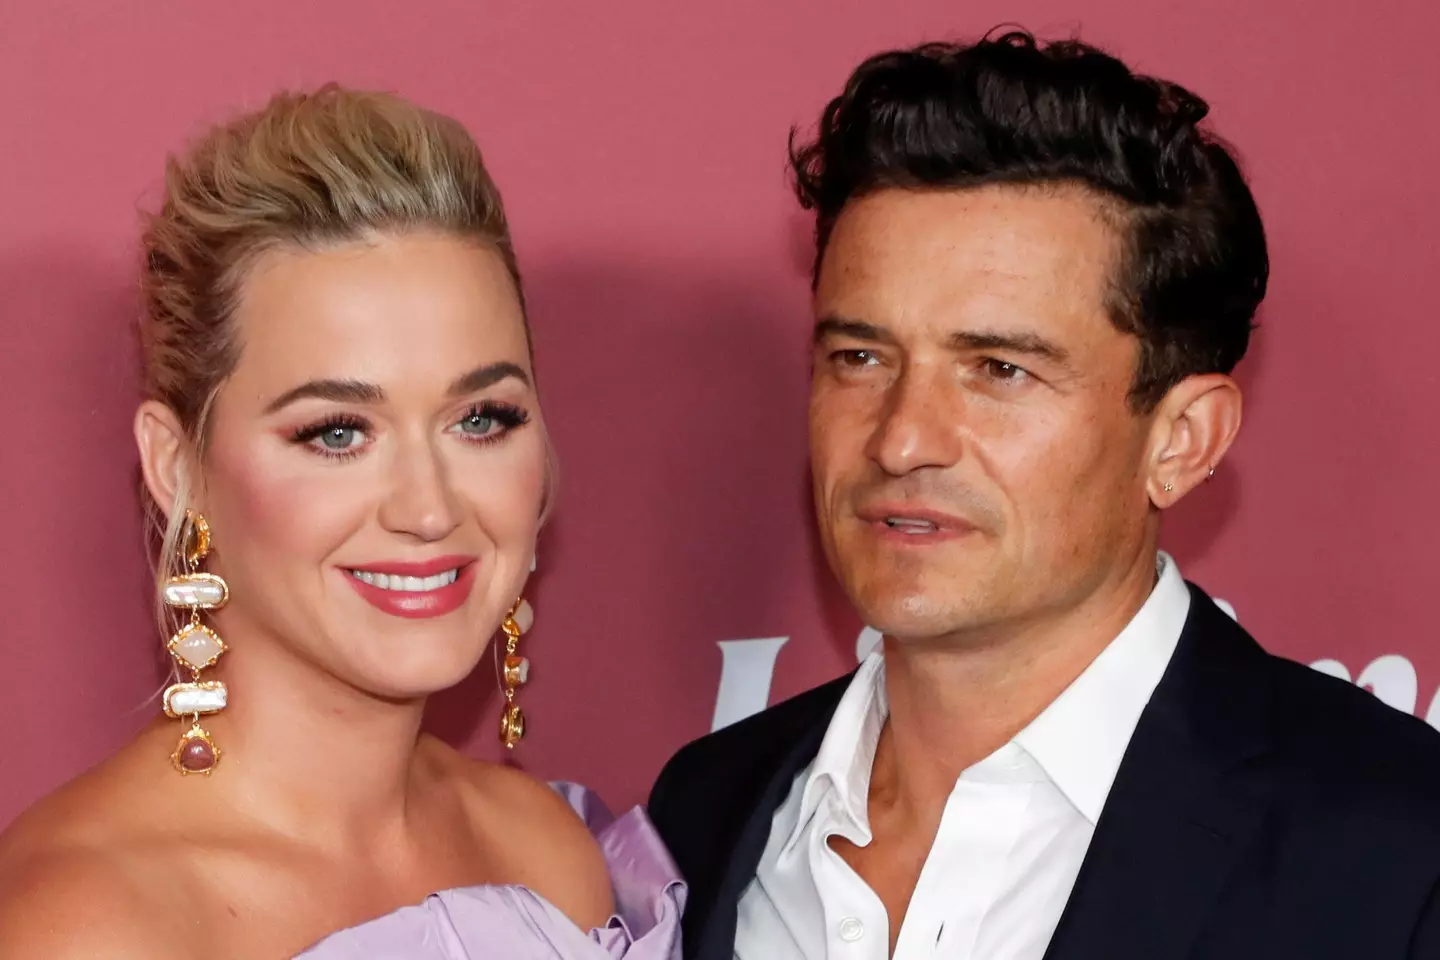 Katy is currently engaged to actor Orlando Bloom, with whom she shares one child (